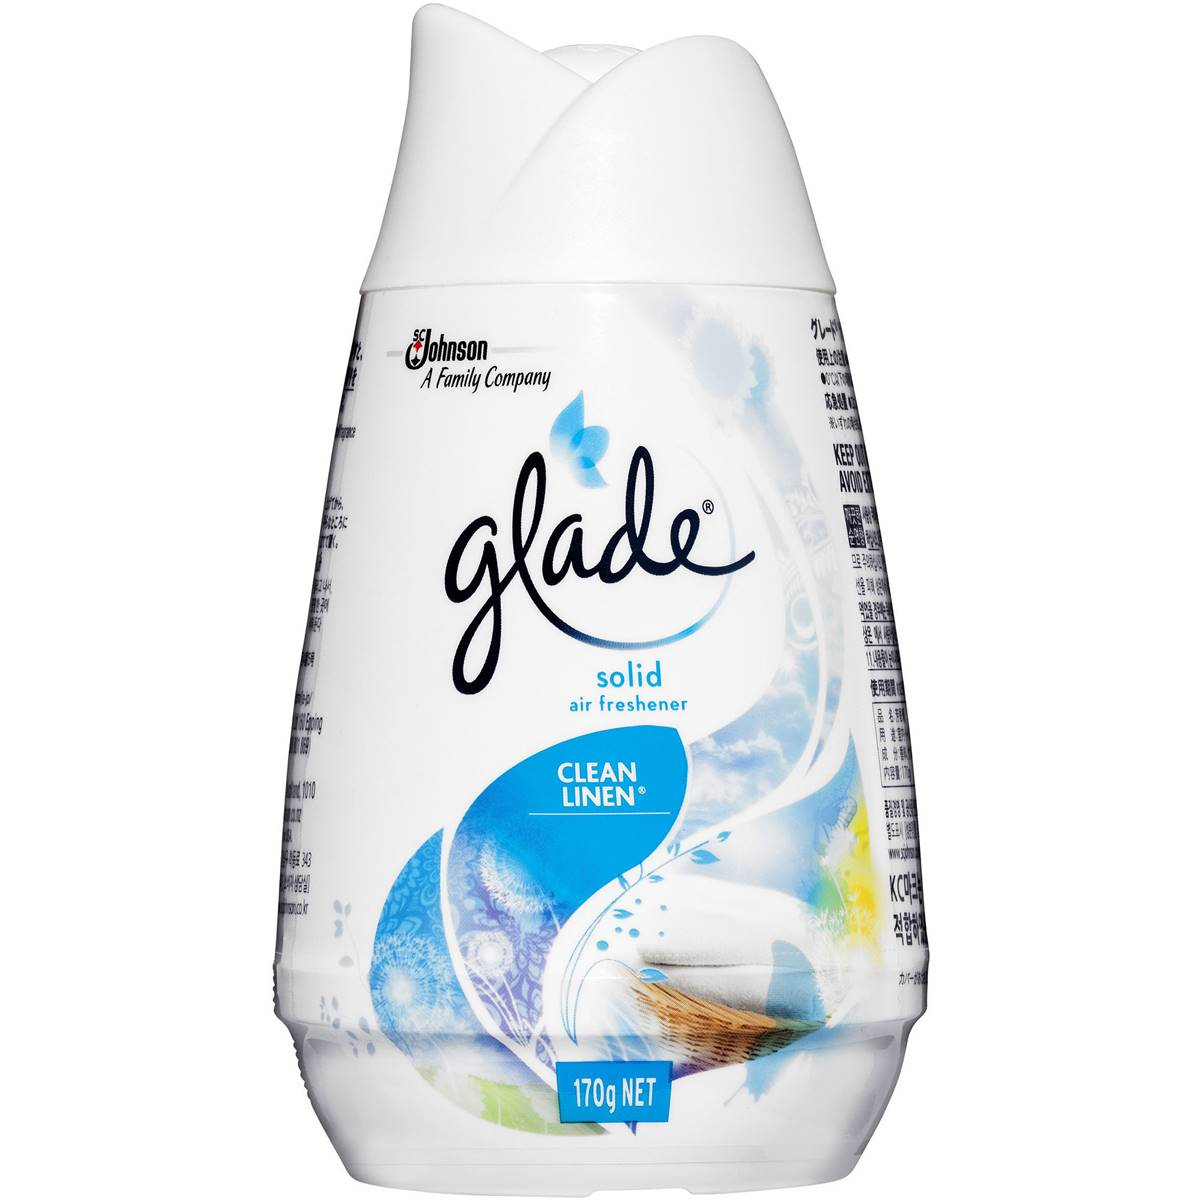 GLADE-LB (Glade Clean Linen Solid Air Freshener 170g)